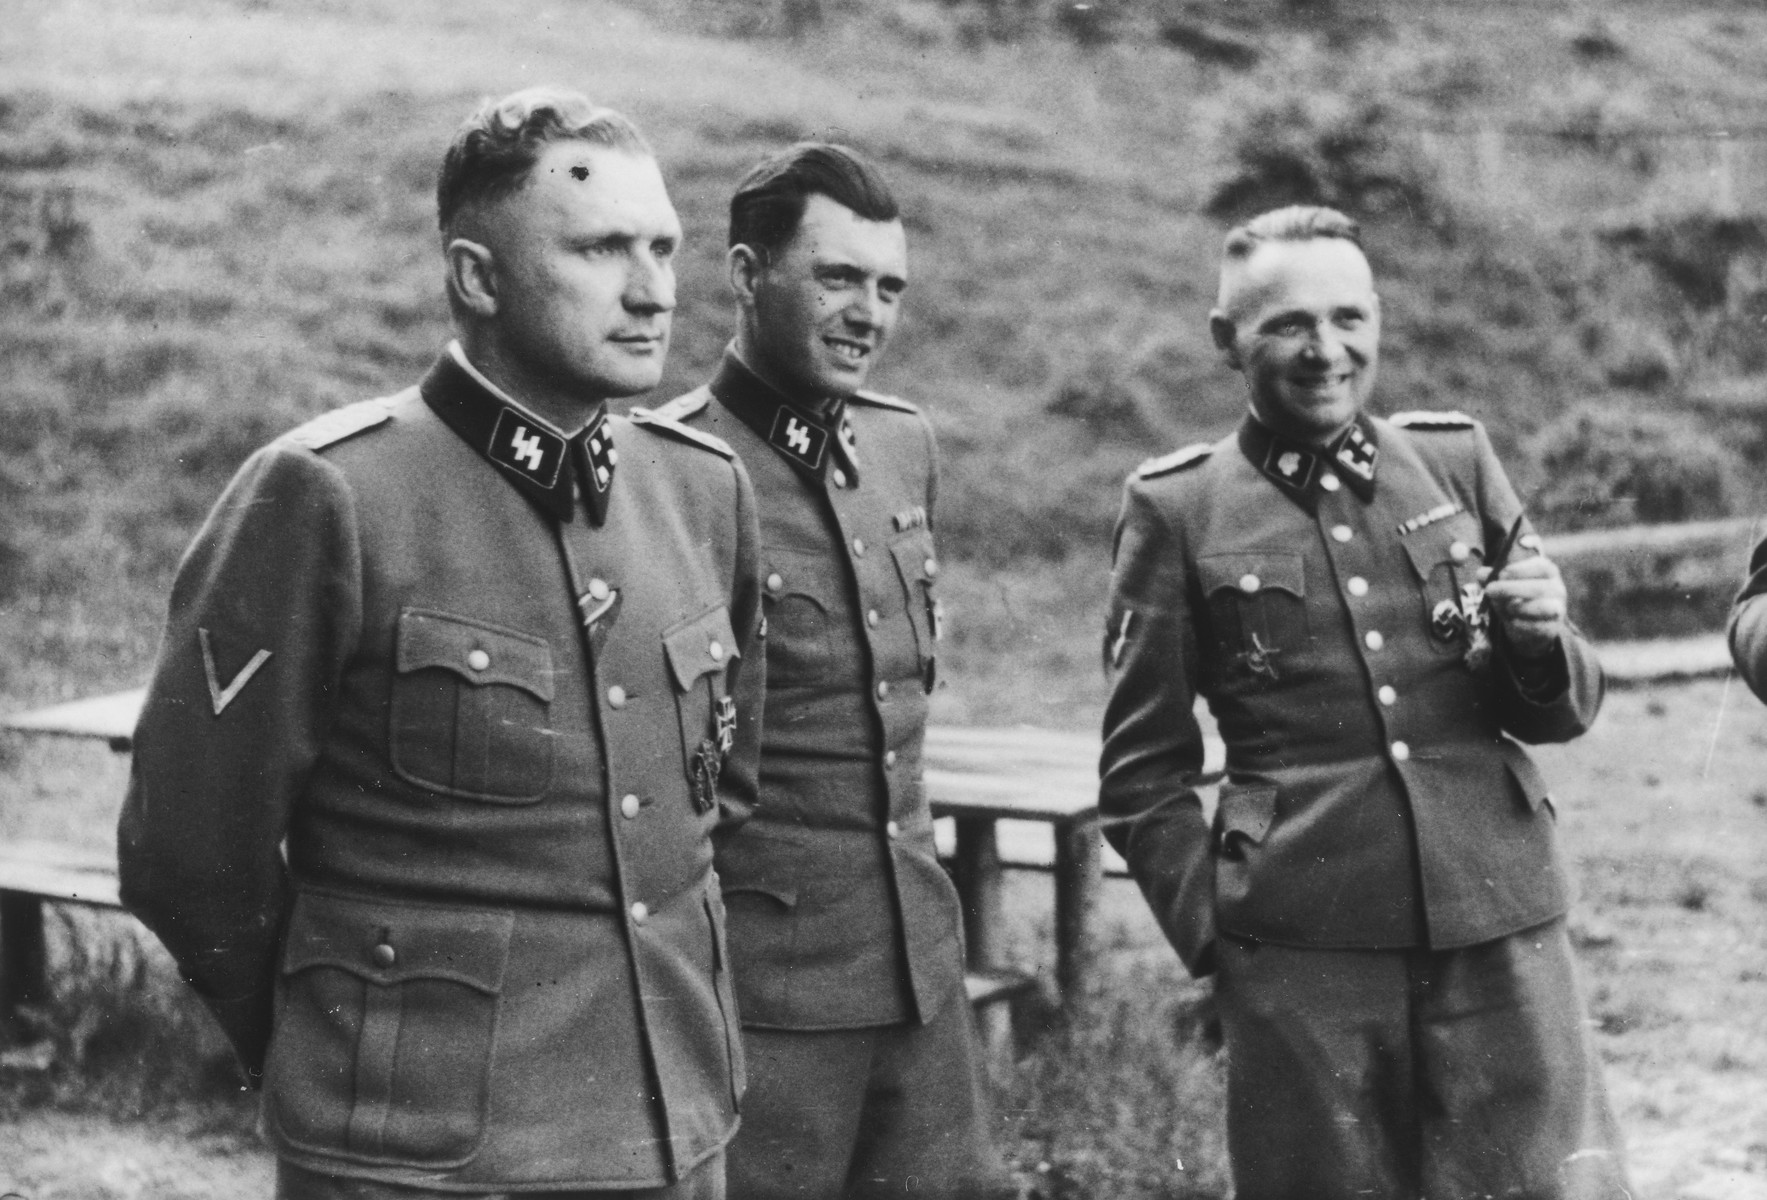 Three SS officers socialize on the grounds of the SS retreat of Solahuette outside of Auschwitz.

From left to right they are: Richard Baer (Commandant of Auschwitz), Dr. Josef Mengele and Rudolf Hoess (the former Auschwitz Commandant). 

[Based on the officers visiting Solahutte, we surmise that the photographs were taken to honor Rudolf Hoess who completed his tenure as garrison senior on July 29.]